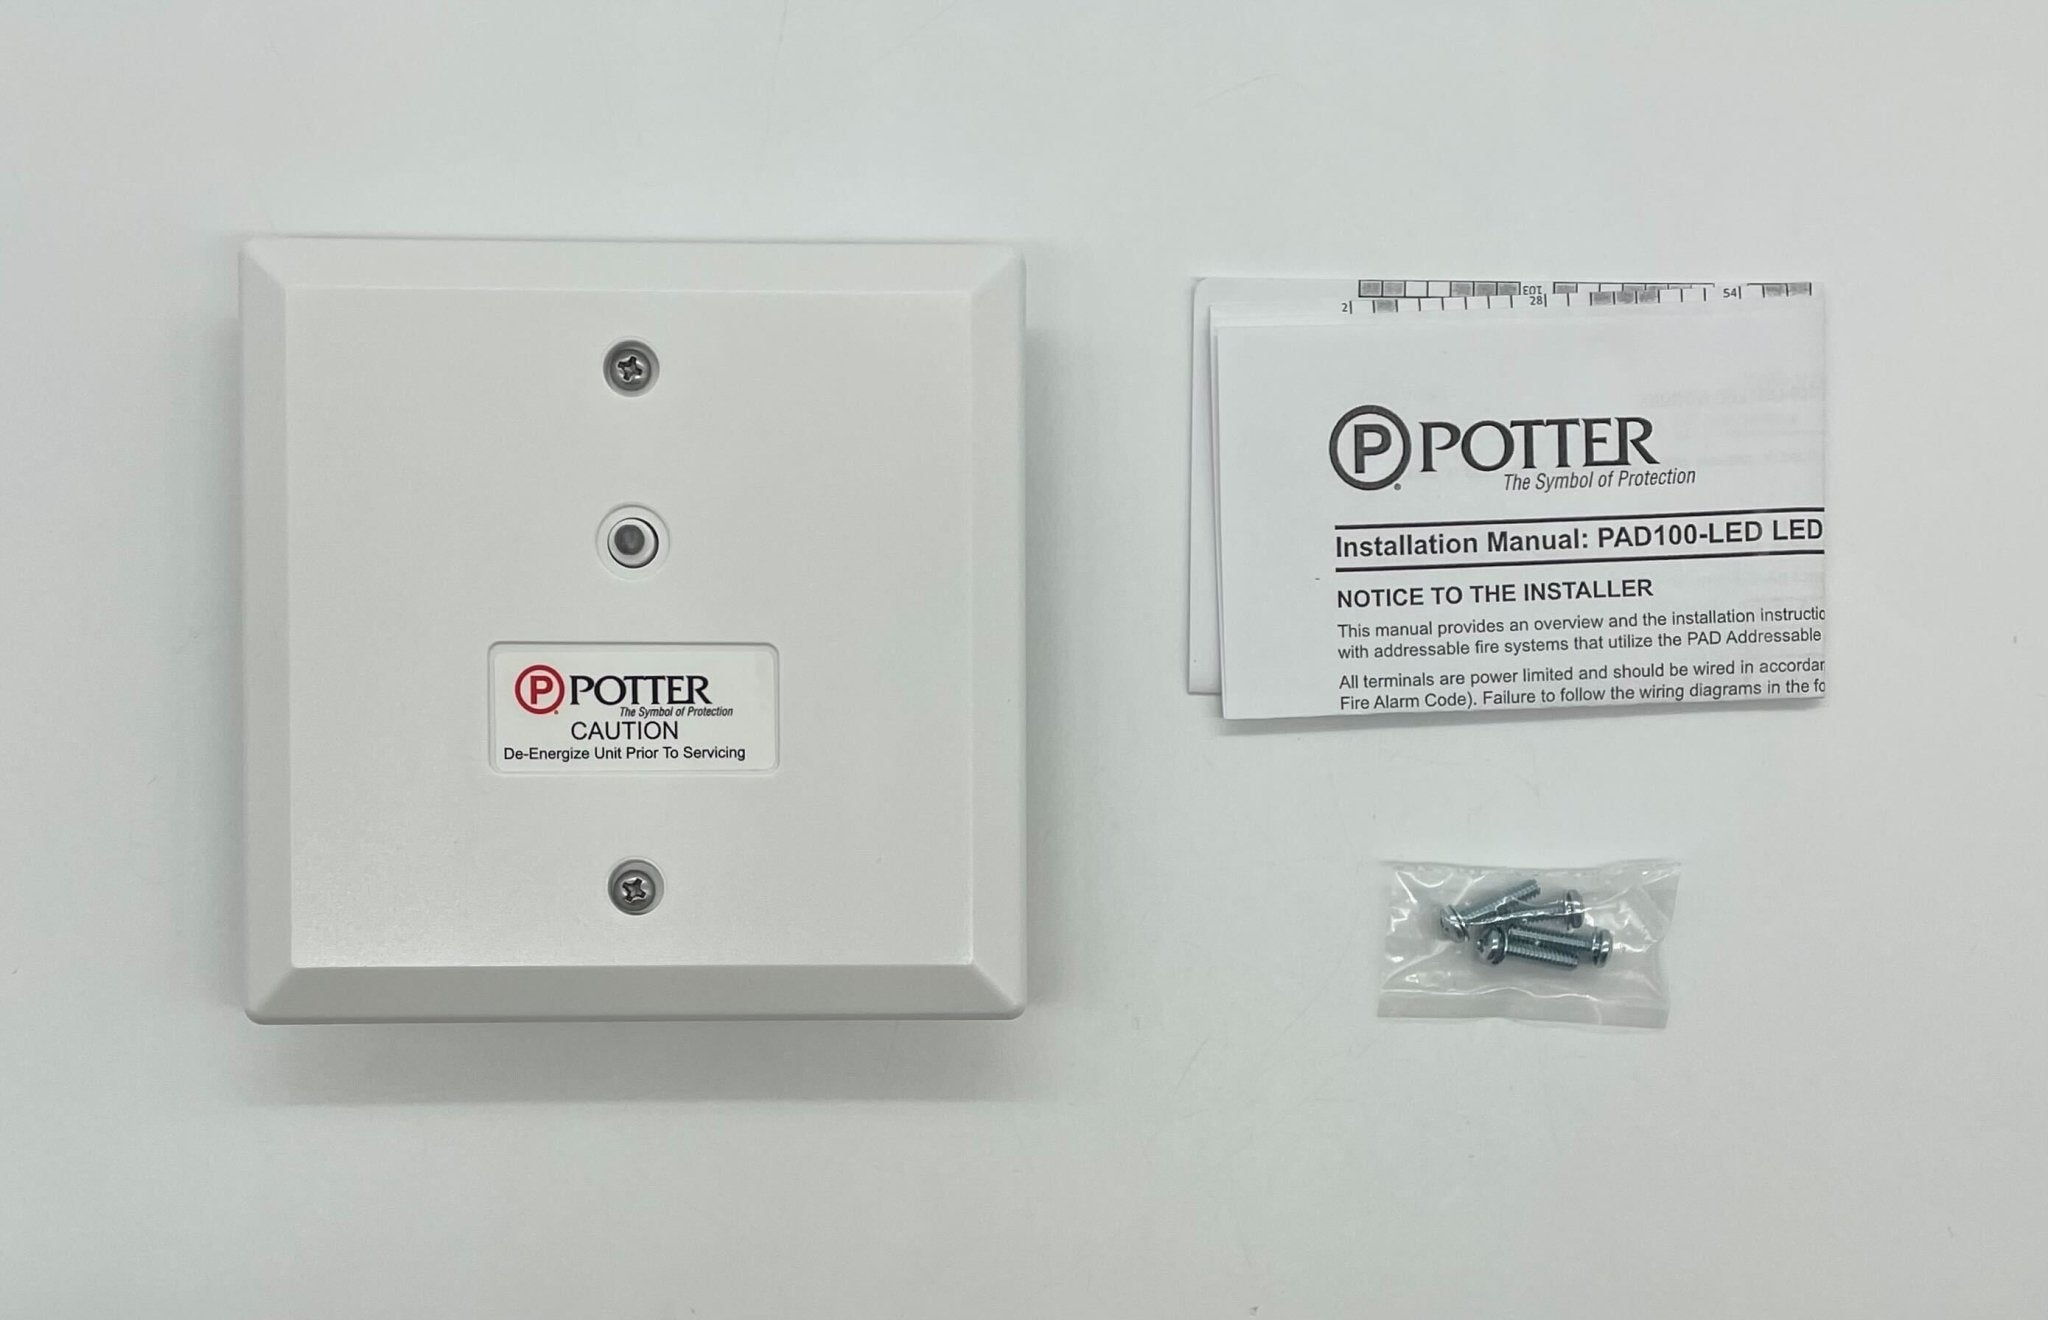 Potter PAD 100-LED - The Fire Alarm Supplier